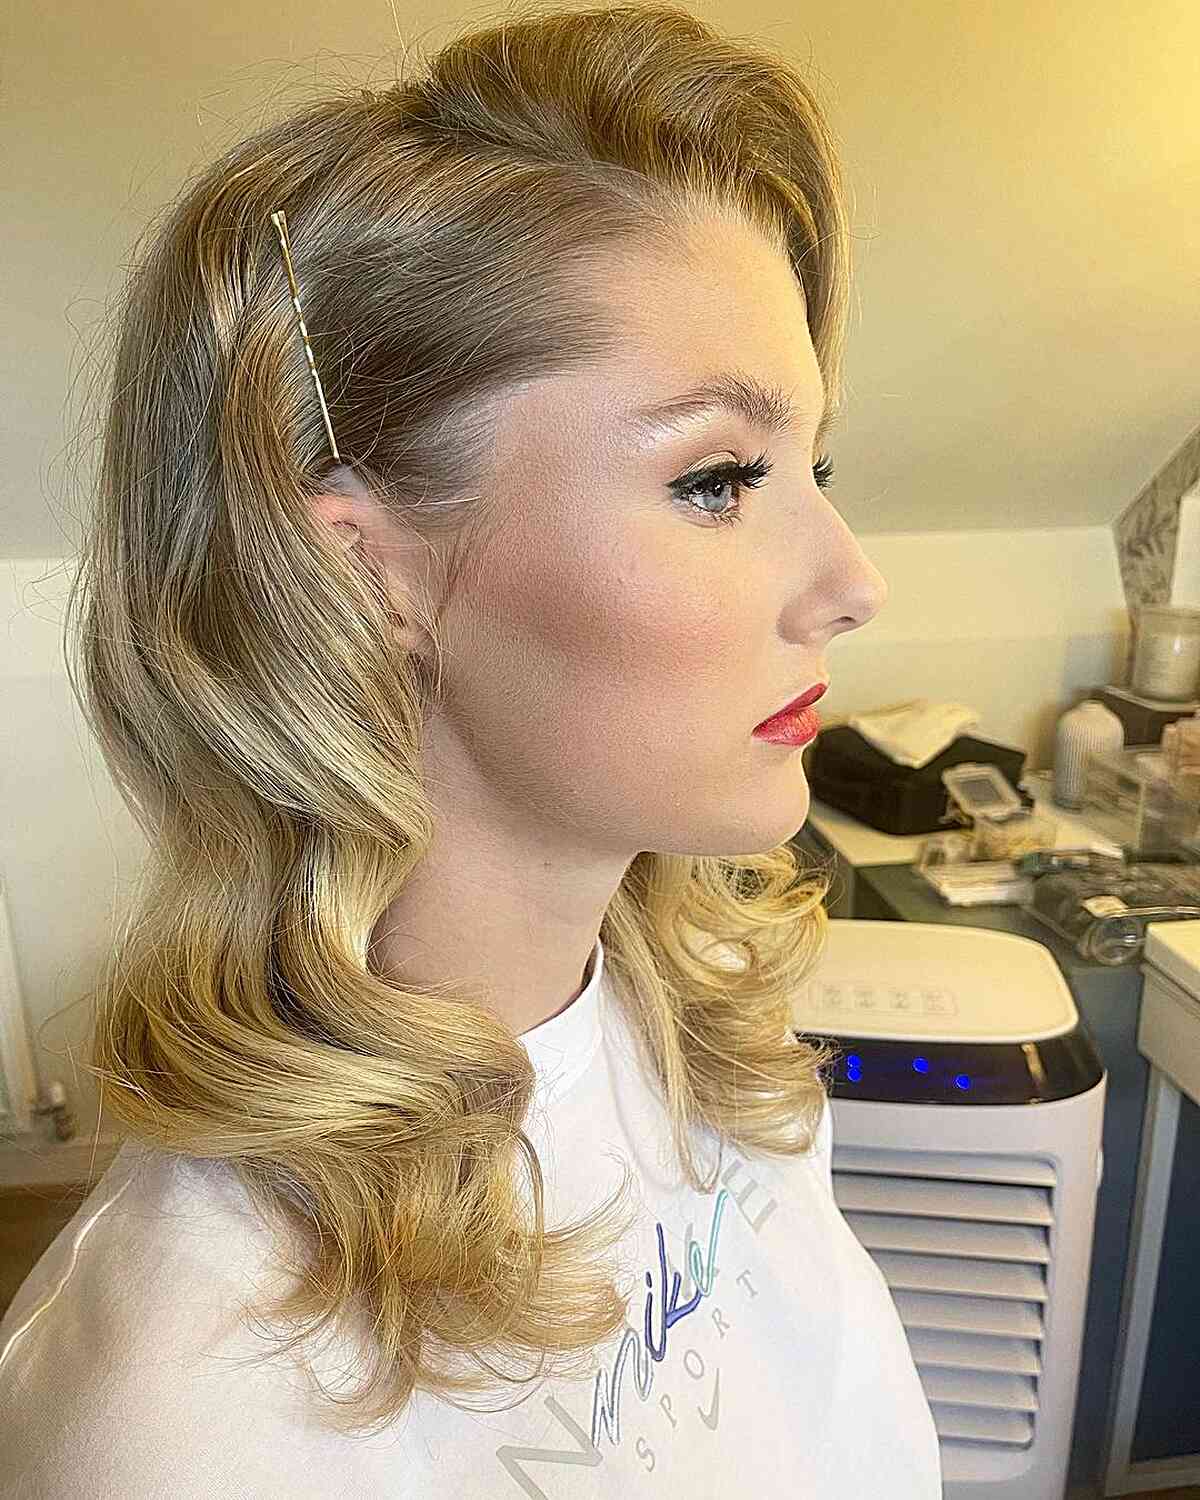 Medium Side Part Style and Voluminous Waves for Prom Night